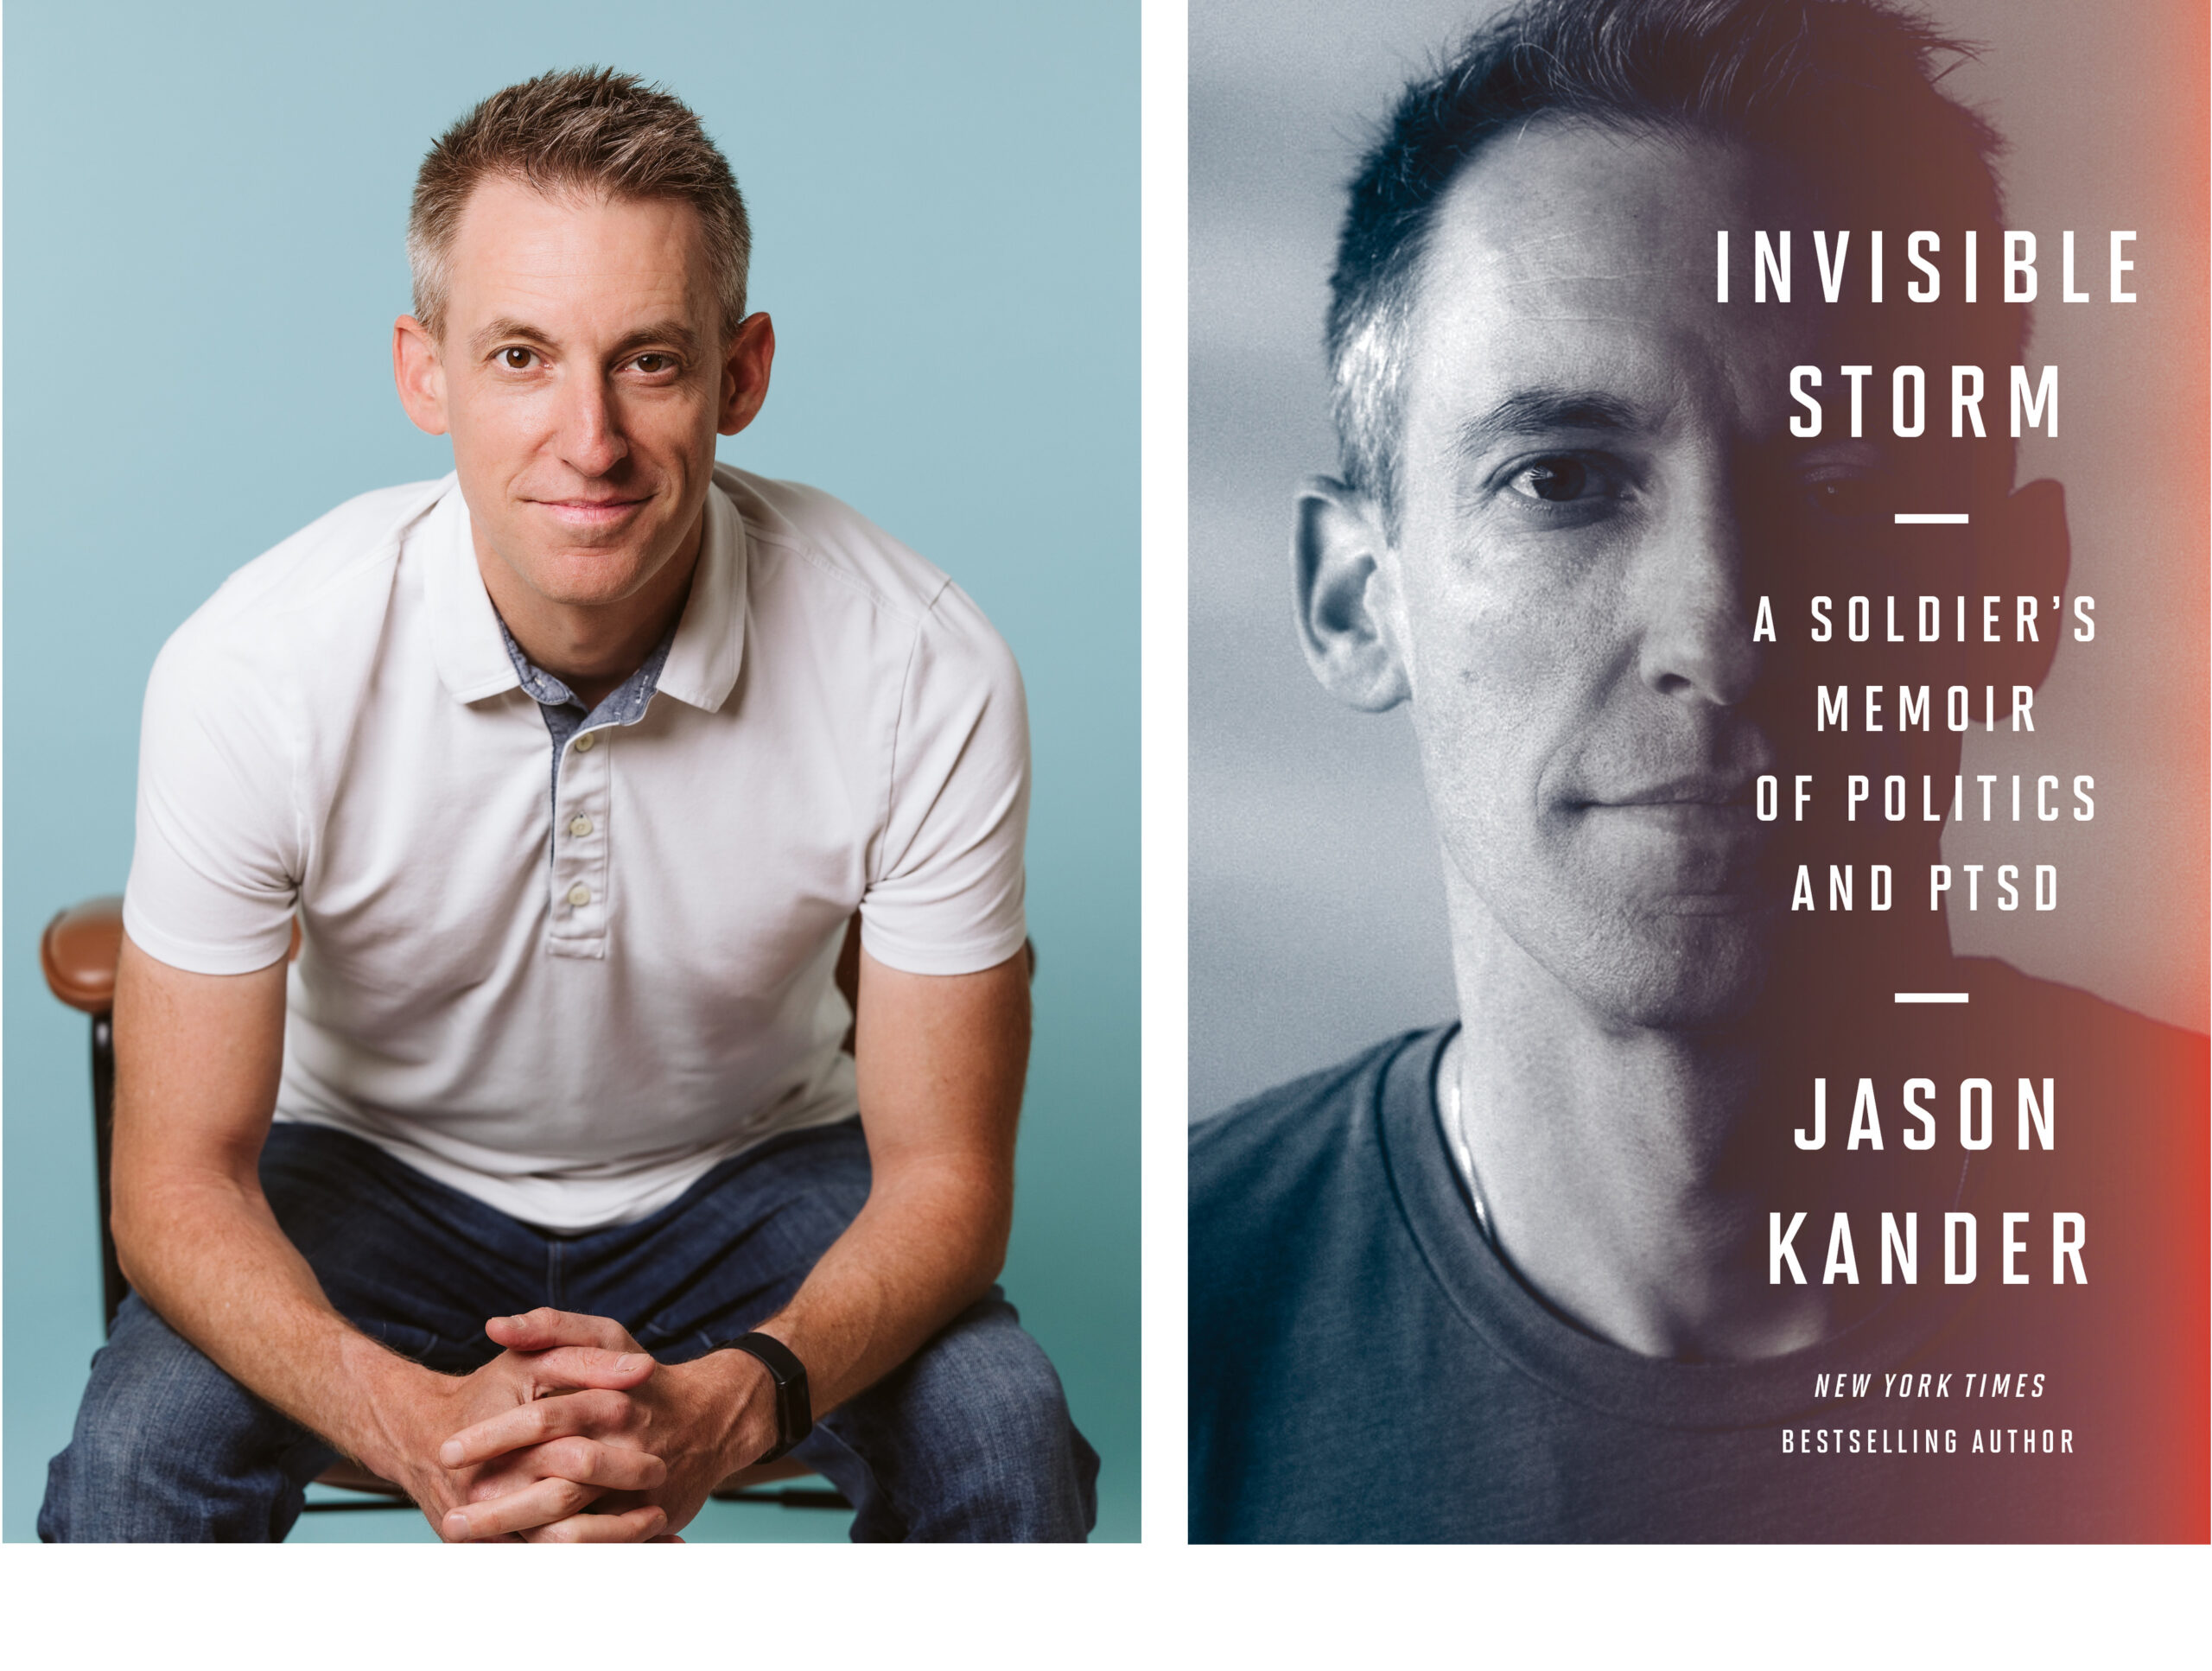 Invisible Storm: A Soldier’s Memoir of Politics and PTSD by Jason Kander 